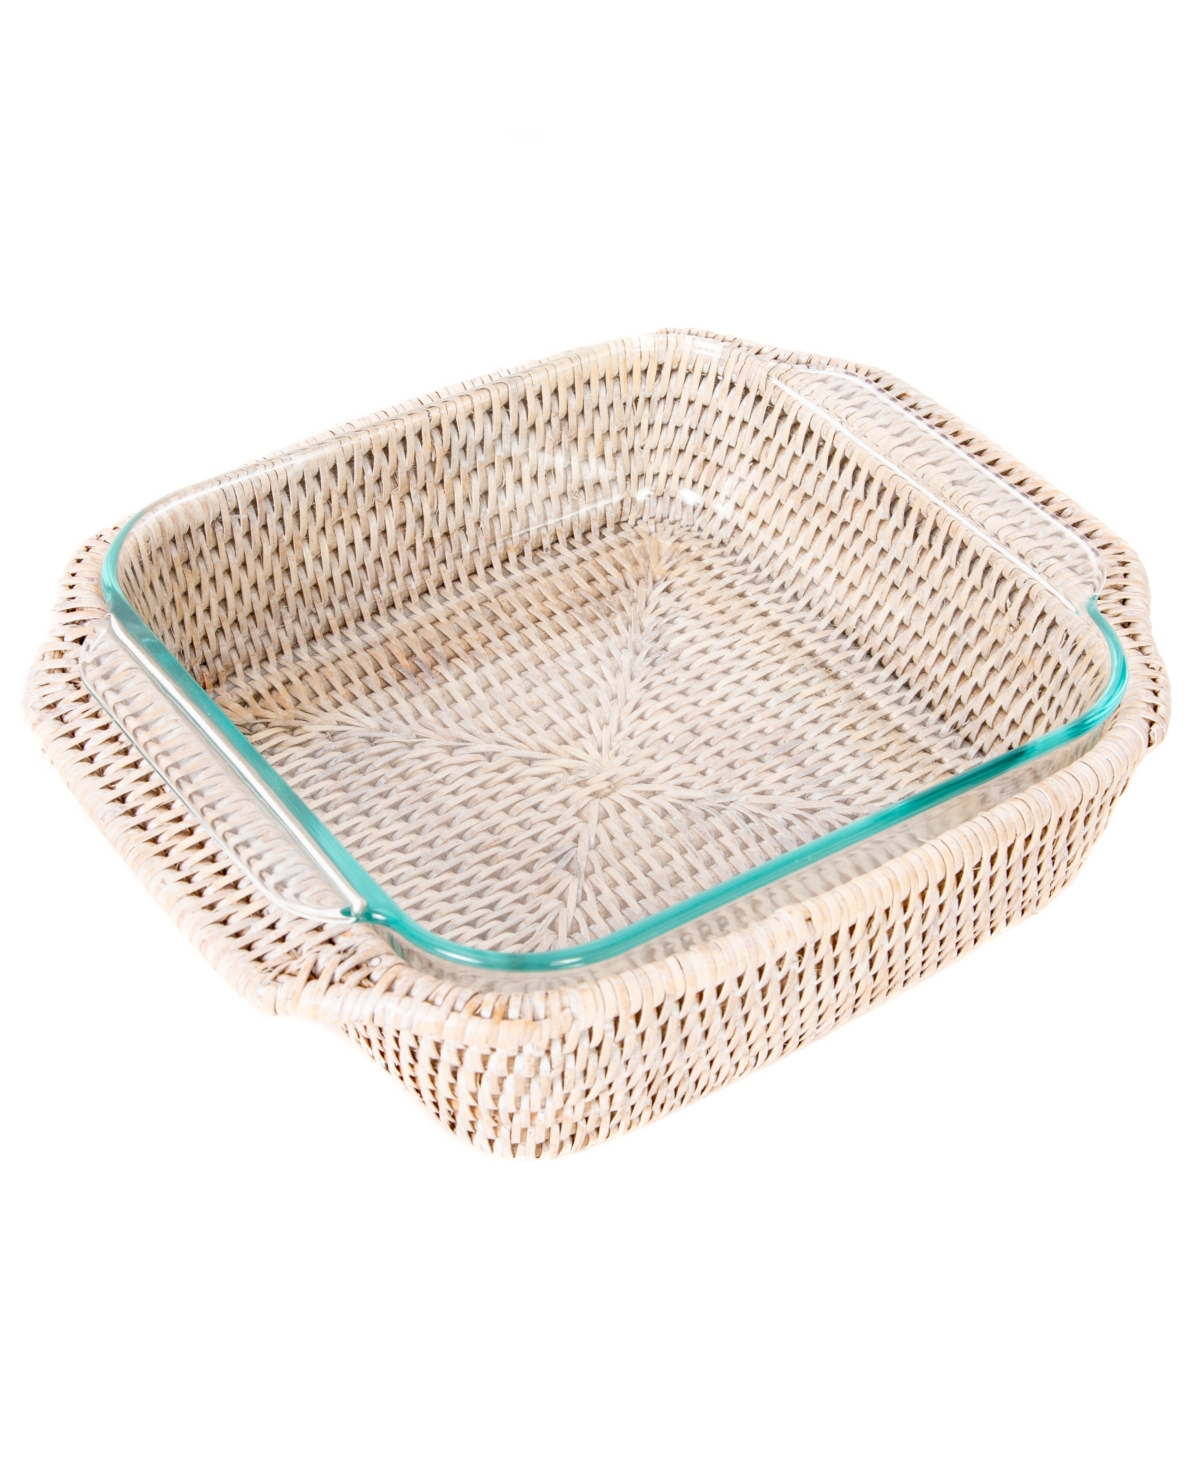 Artifacts Trading Company Artifacts Rattan Square Baker Basket With Pyrex In Off-white